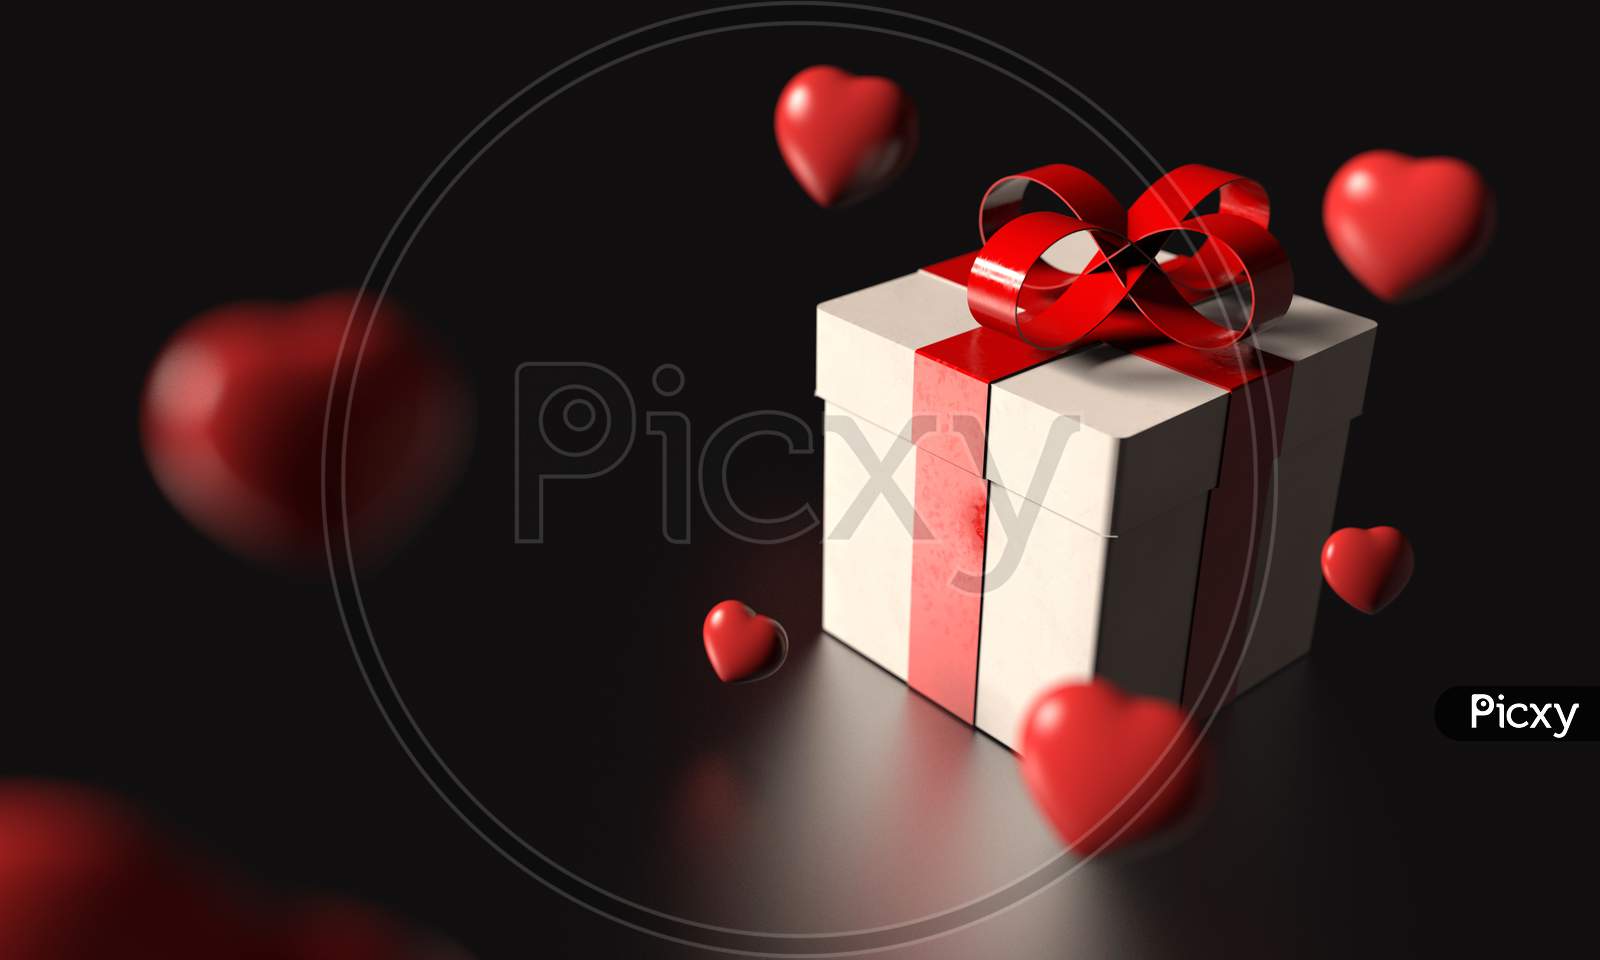 White Gift Box With Red Ribbon And Many Rainy Heart Dropping From Sky On Black Background. Valentine Christmas Holiday And Black Friday Concept. Celebration And Birthday Event. 3D Illustration